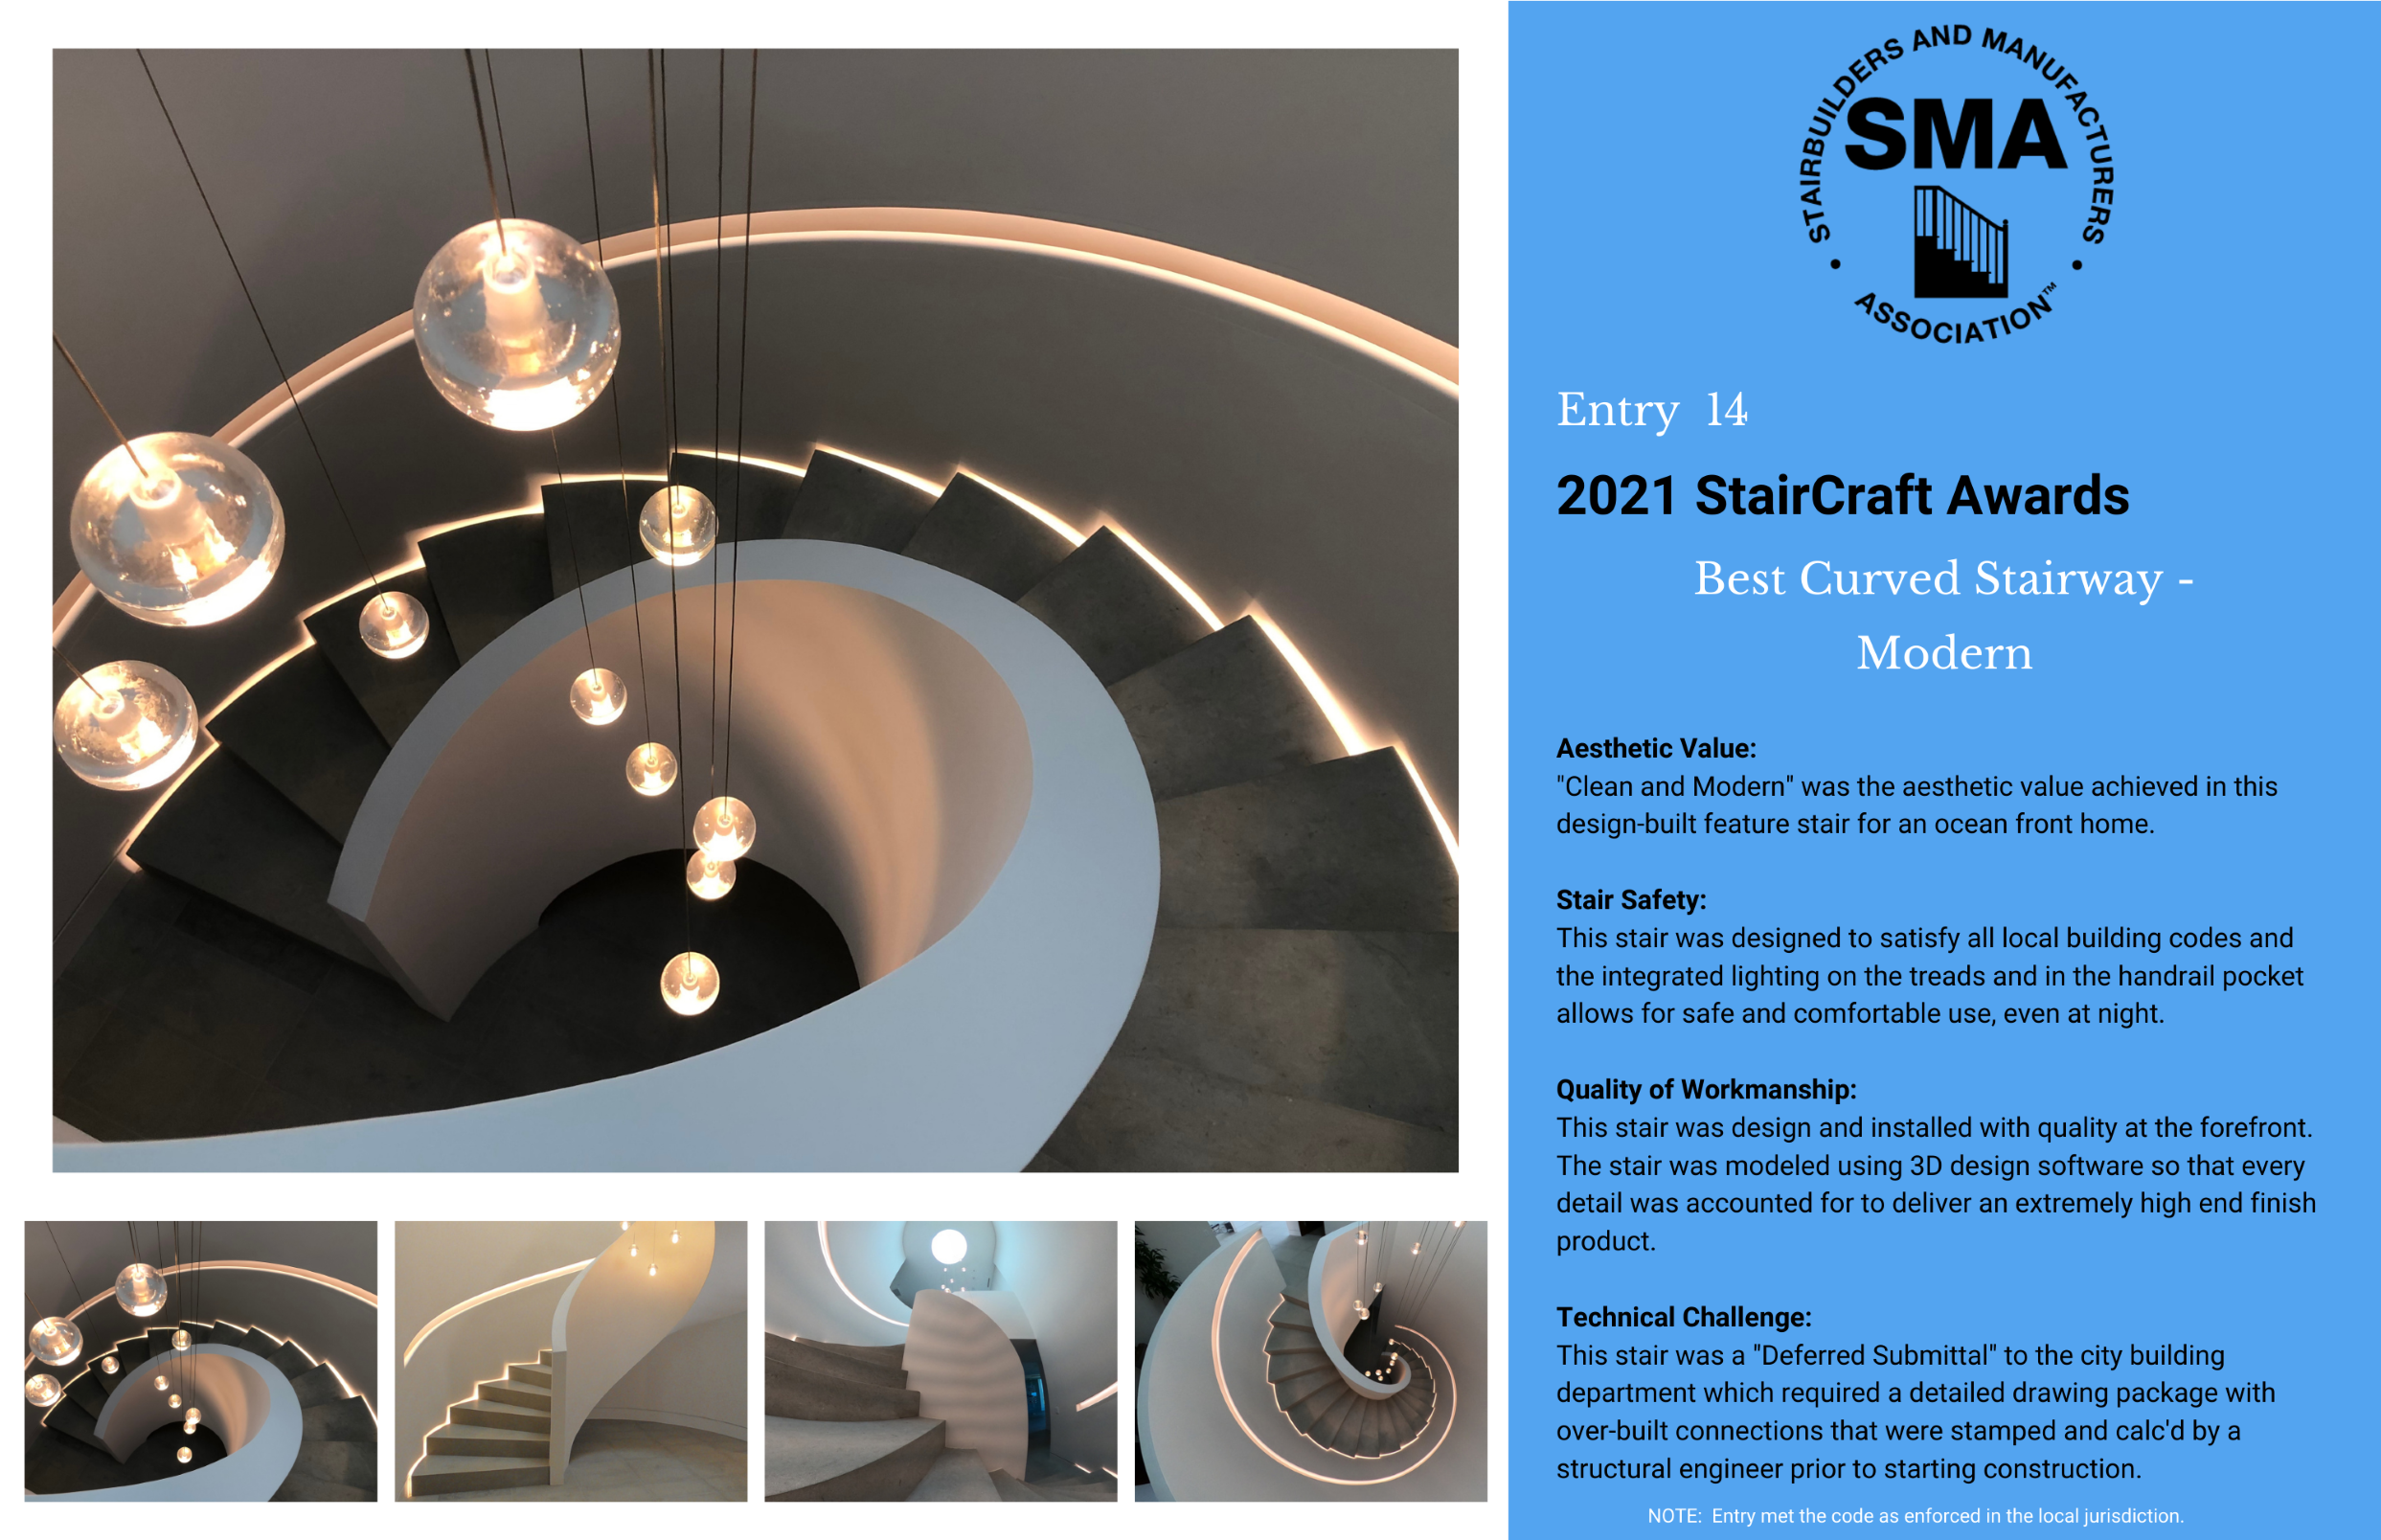 2021 StairCraft Awards Entry 14